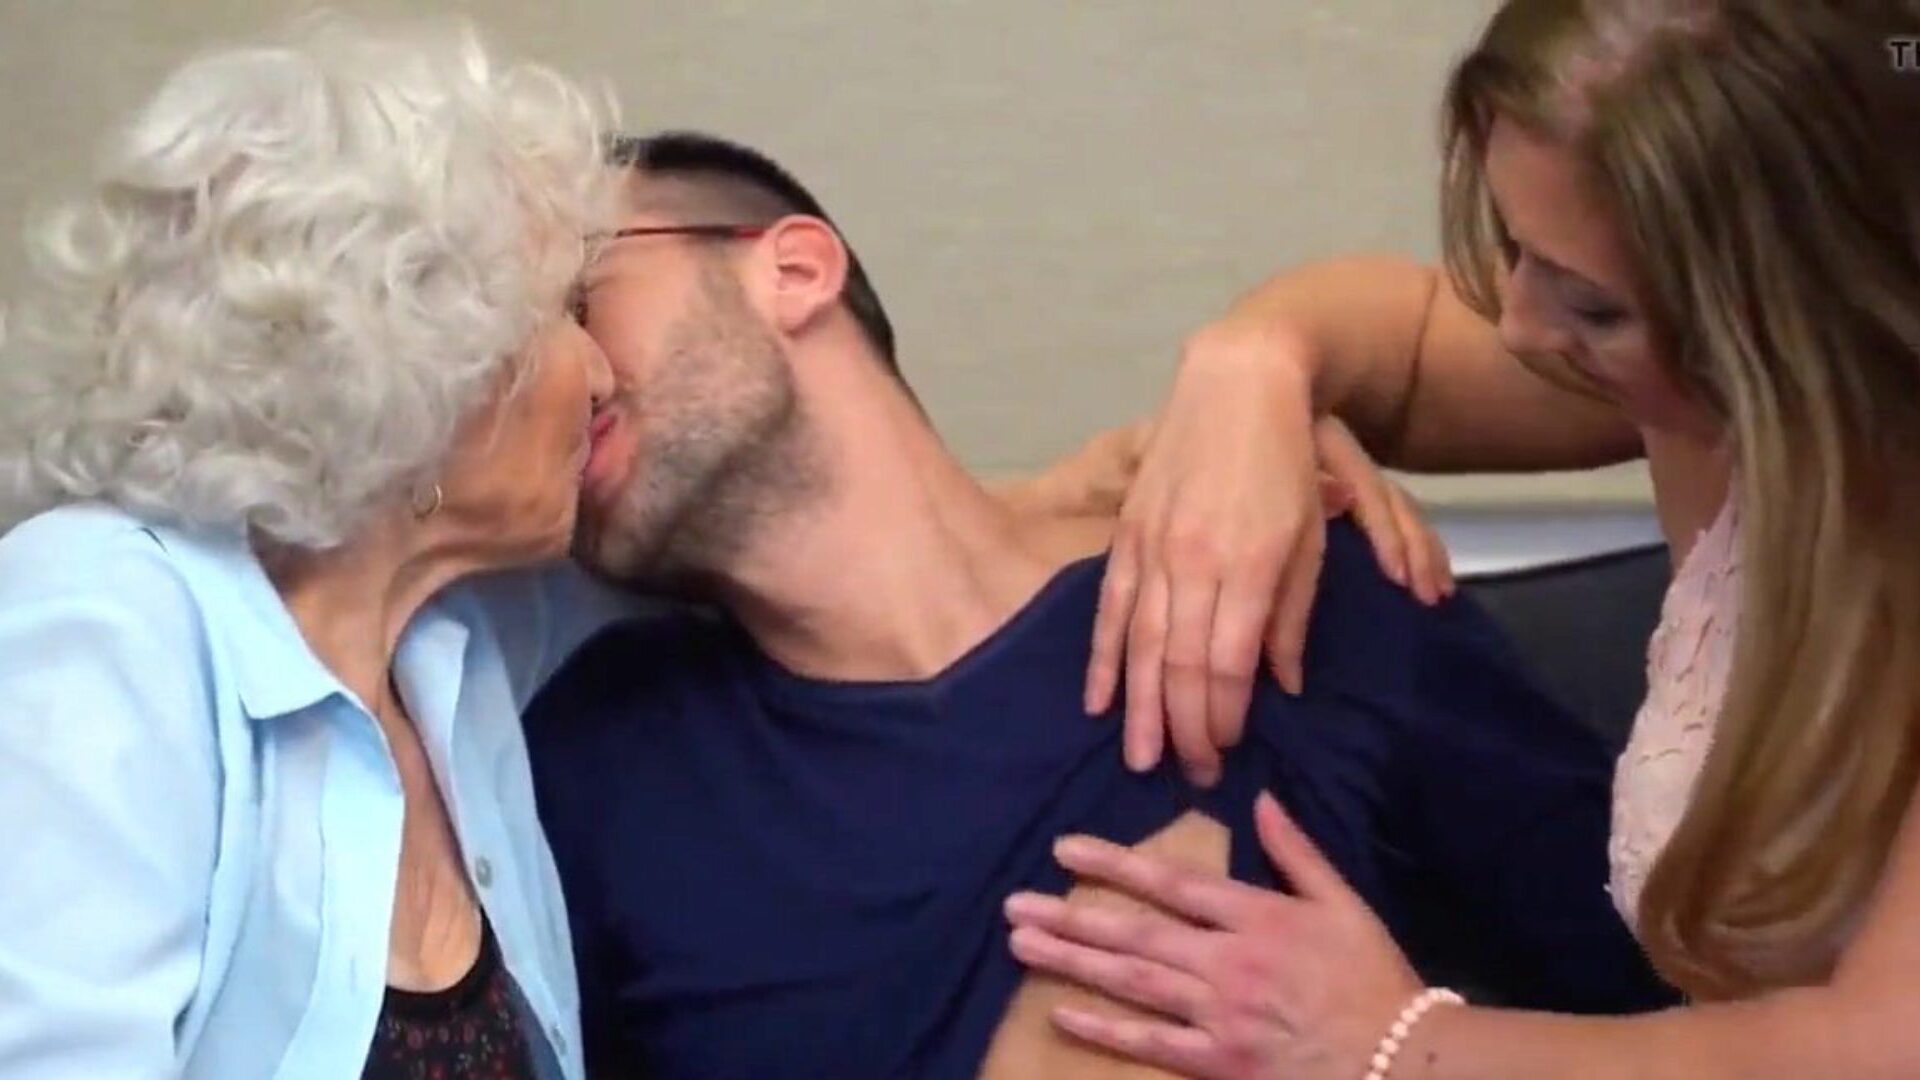 granny 85yo mature 49yo and boy in bisexual threesome watch granny 85yo mature 49yo and boy in bisexual threesome video on xhamster - the ultimate archive of free mature group & milf threesome hd porno tube vids